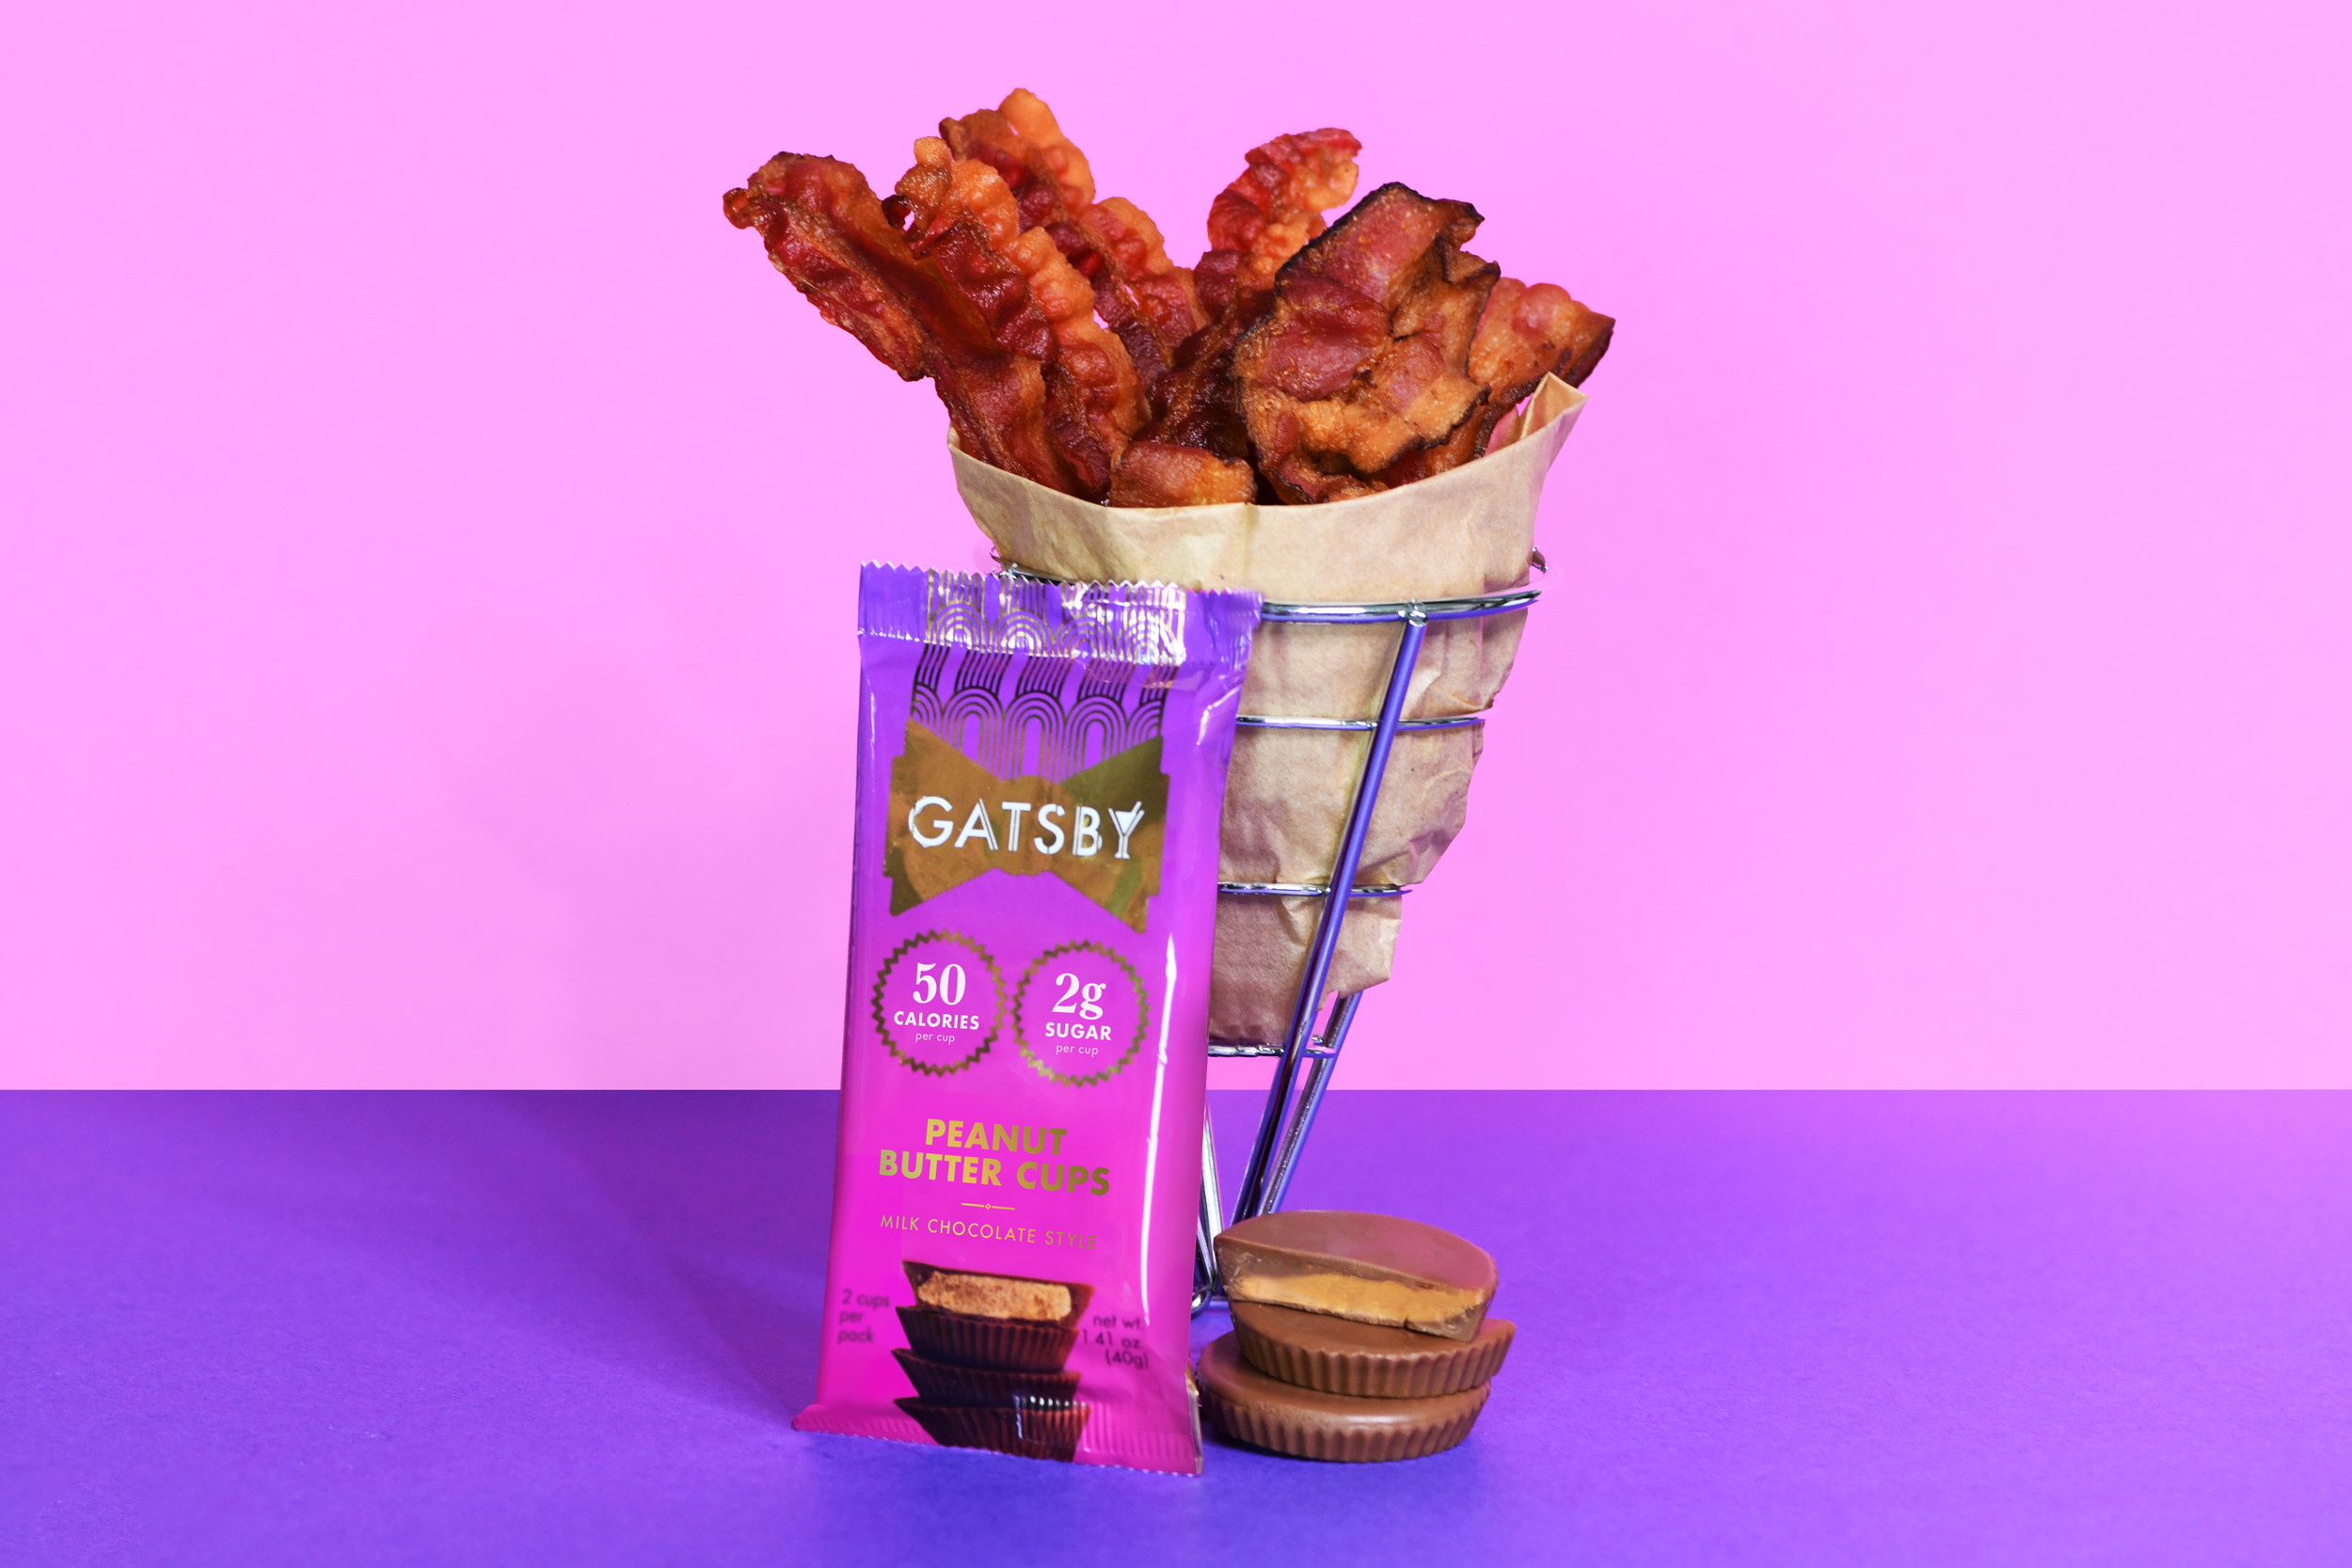 A package of peanut butter cups set beside a basket filled with bacon